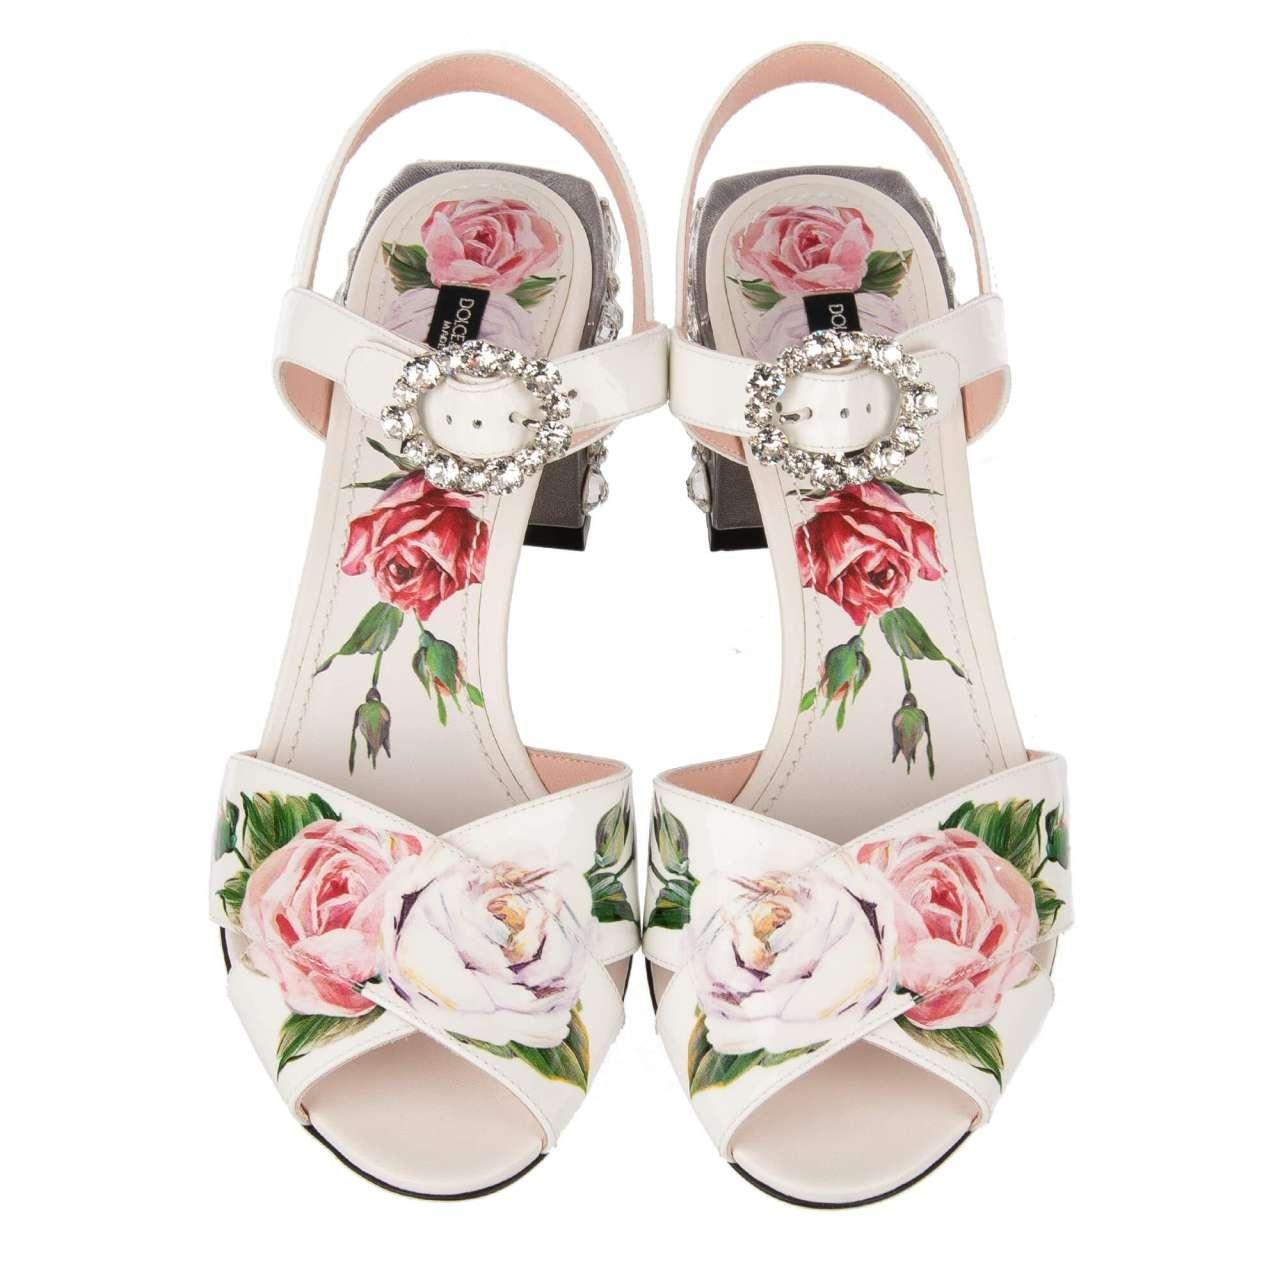 - Patent Leather Roses Sandals KEIRA with crystals embellished heel in white and silver by DOLCE & GABBANA - MADE IN ITALY - RUNWAY - Dolce & Gabbana Fashion Show - New with Box - Model: CR0605-AU930-HAR40 - Material: 100% Calfskin - Inside